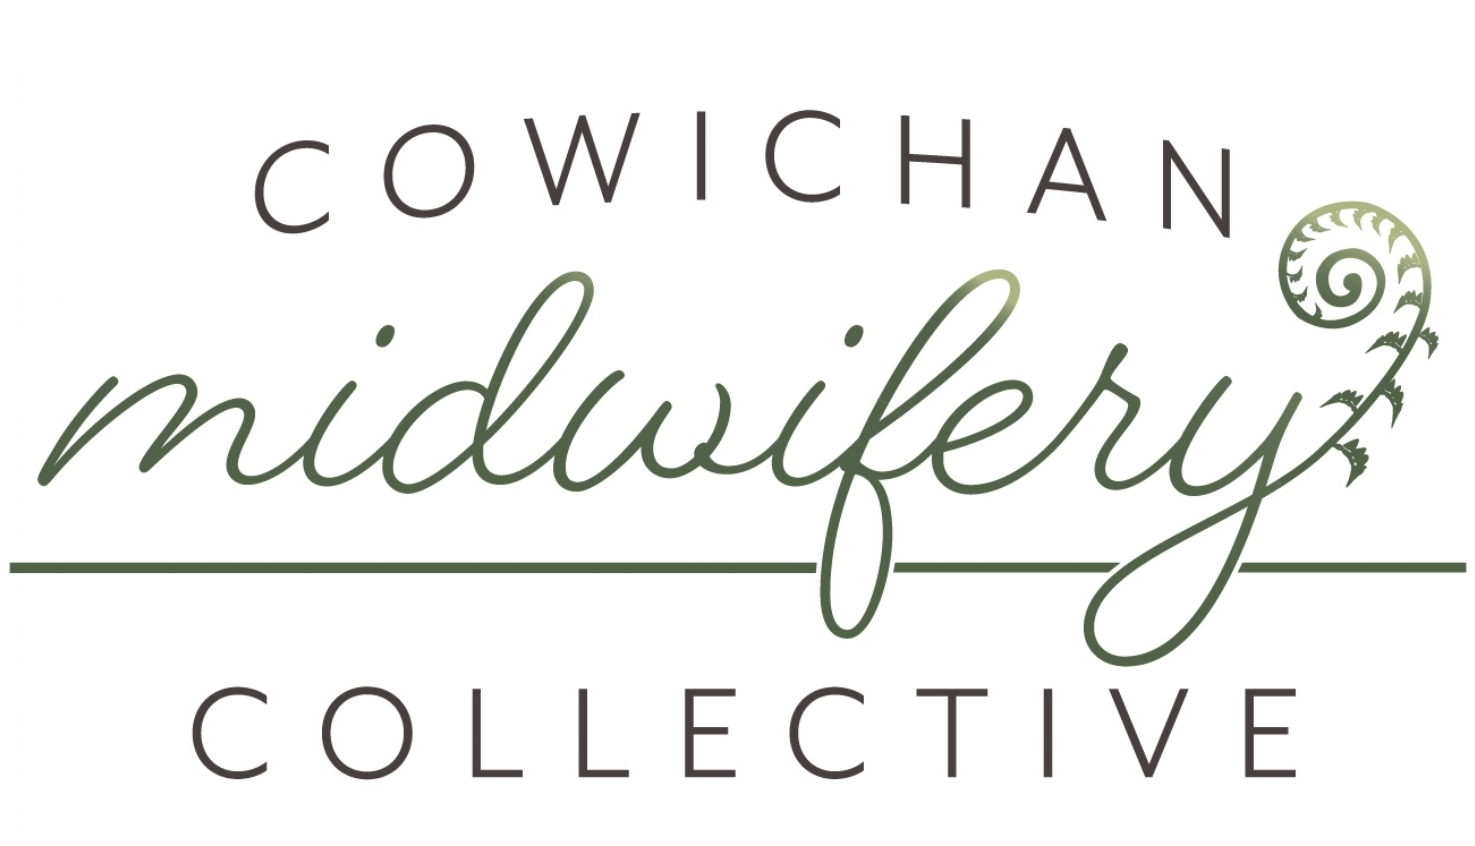 Cowichan Midwifery Collective